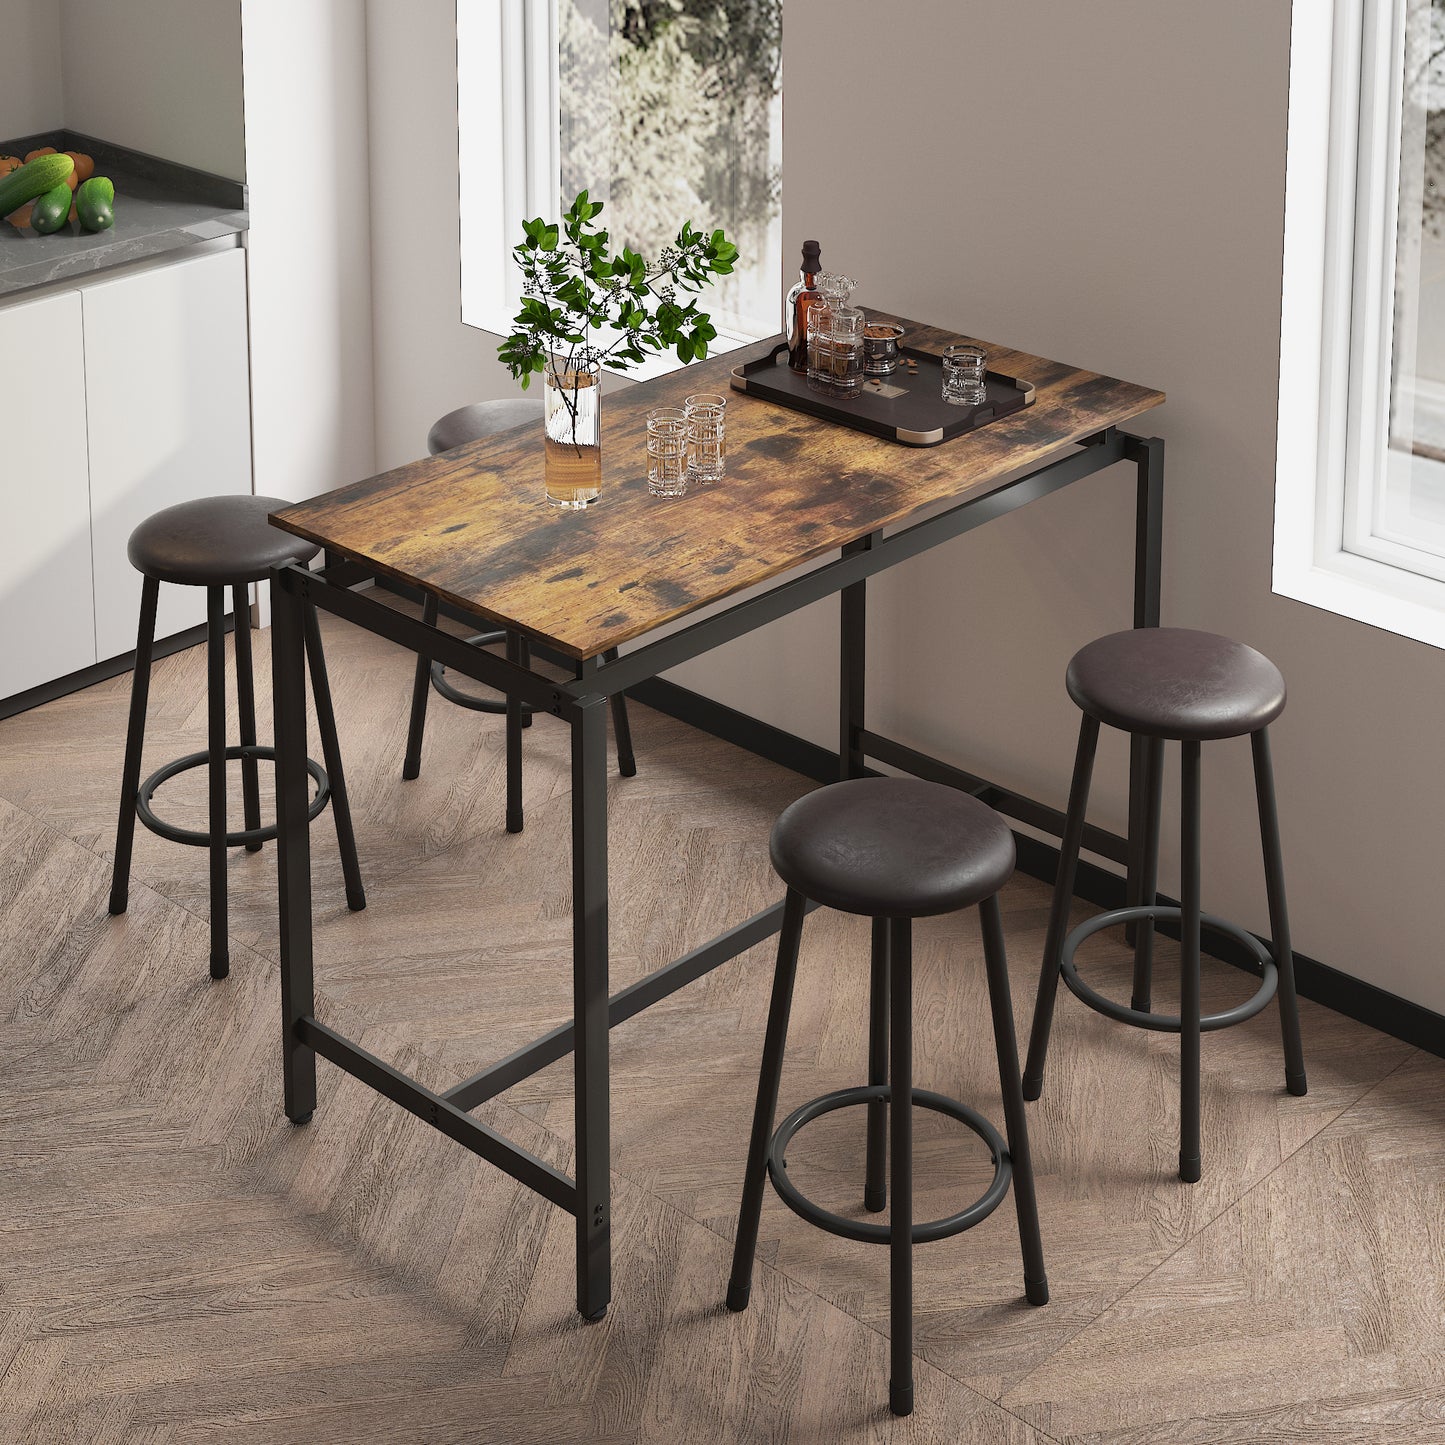 SYNGAR 5 Piece Pub Table Set, Counter Height Faux Marble Bar Table Set with 4 PU Leather Cushioned Stools, Modern Home 4-Person Dining Table Set, Kitchen Breakfast Table and Stools Set, Y010